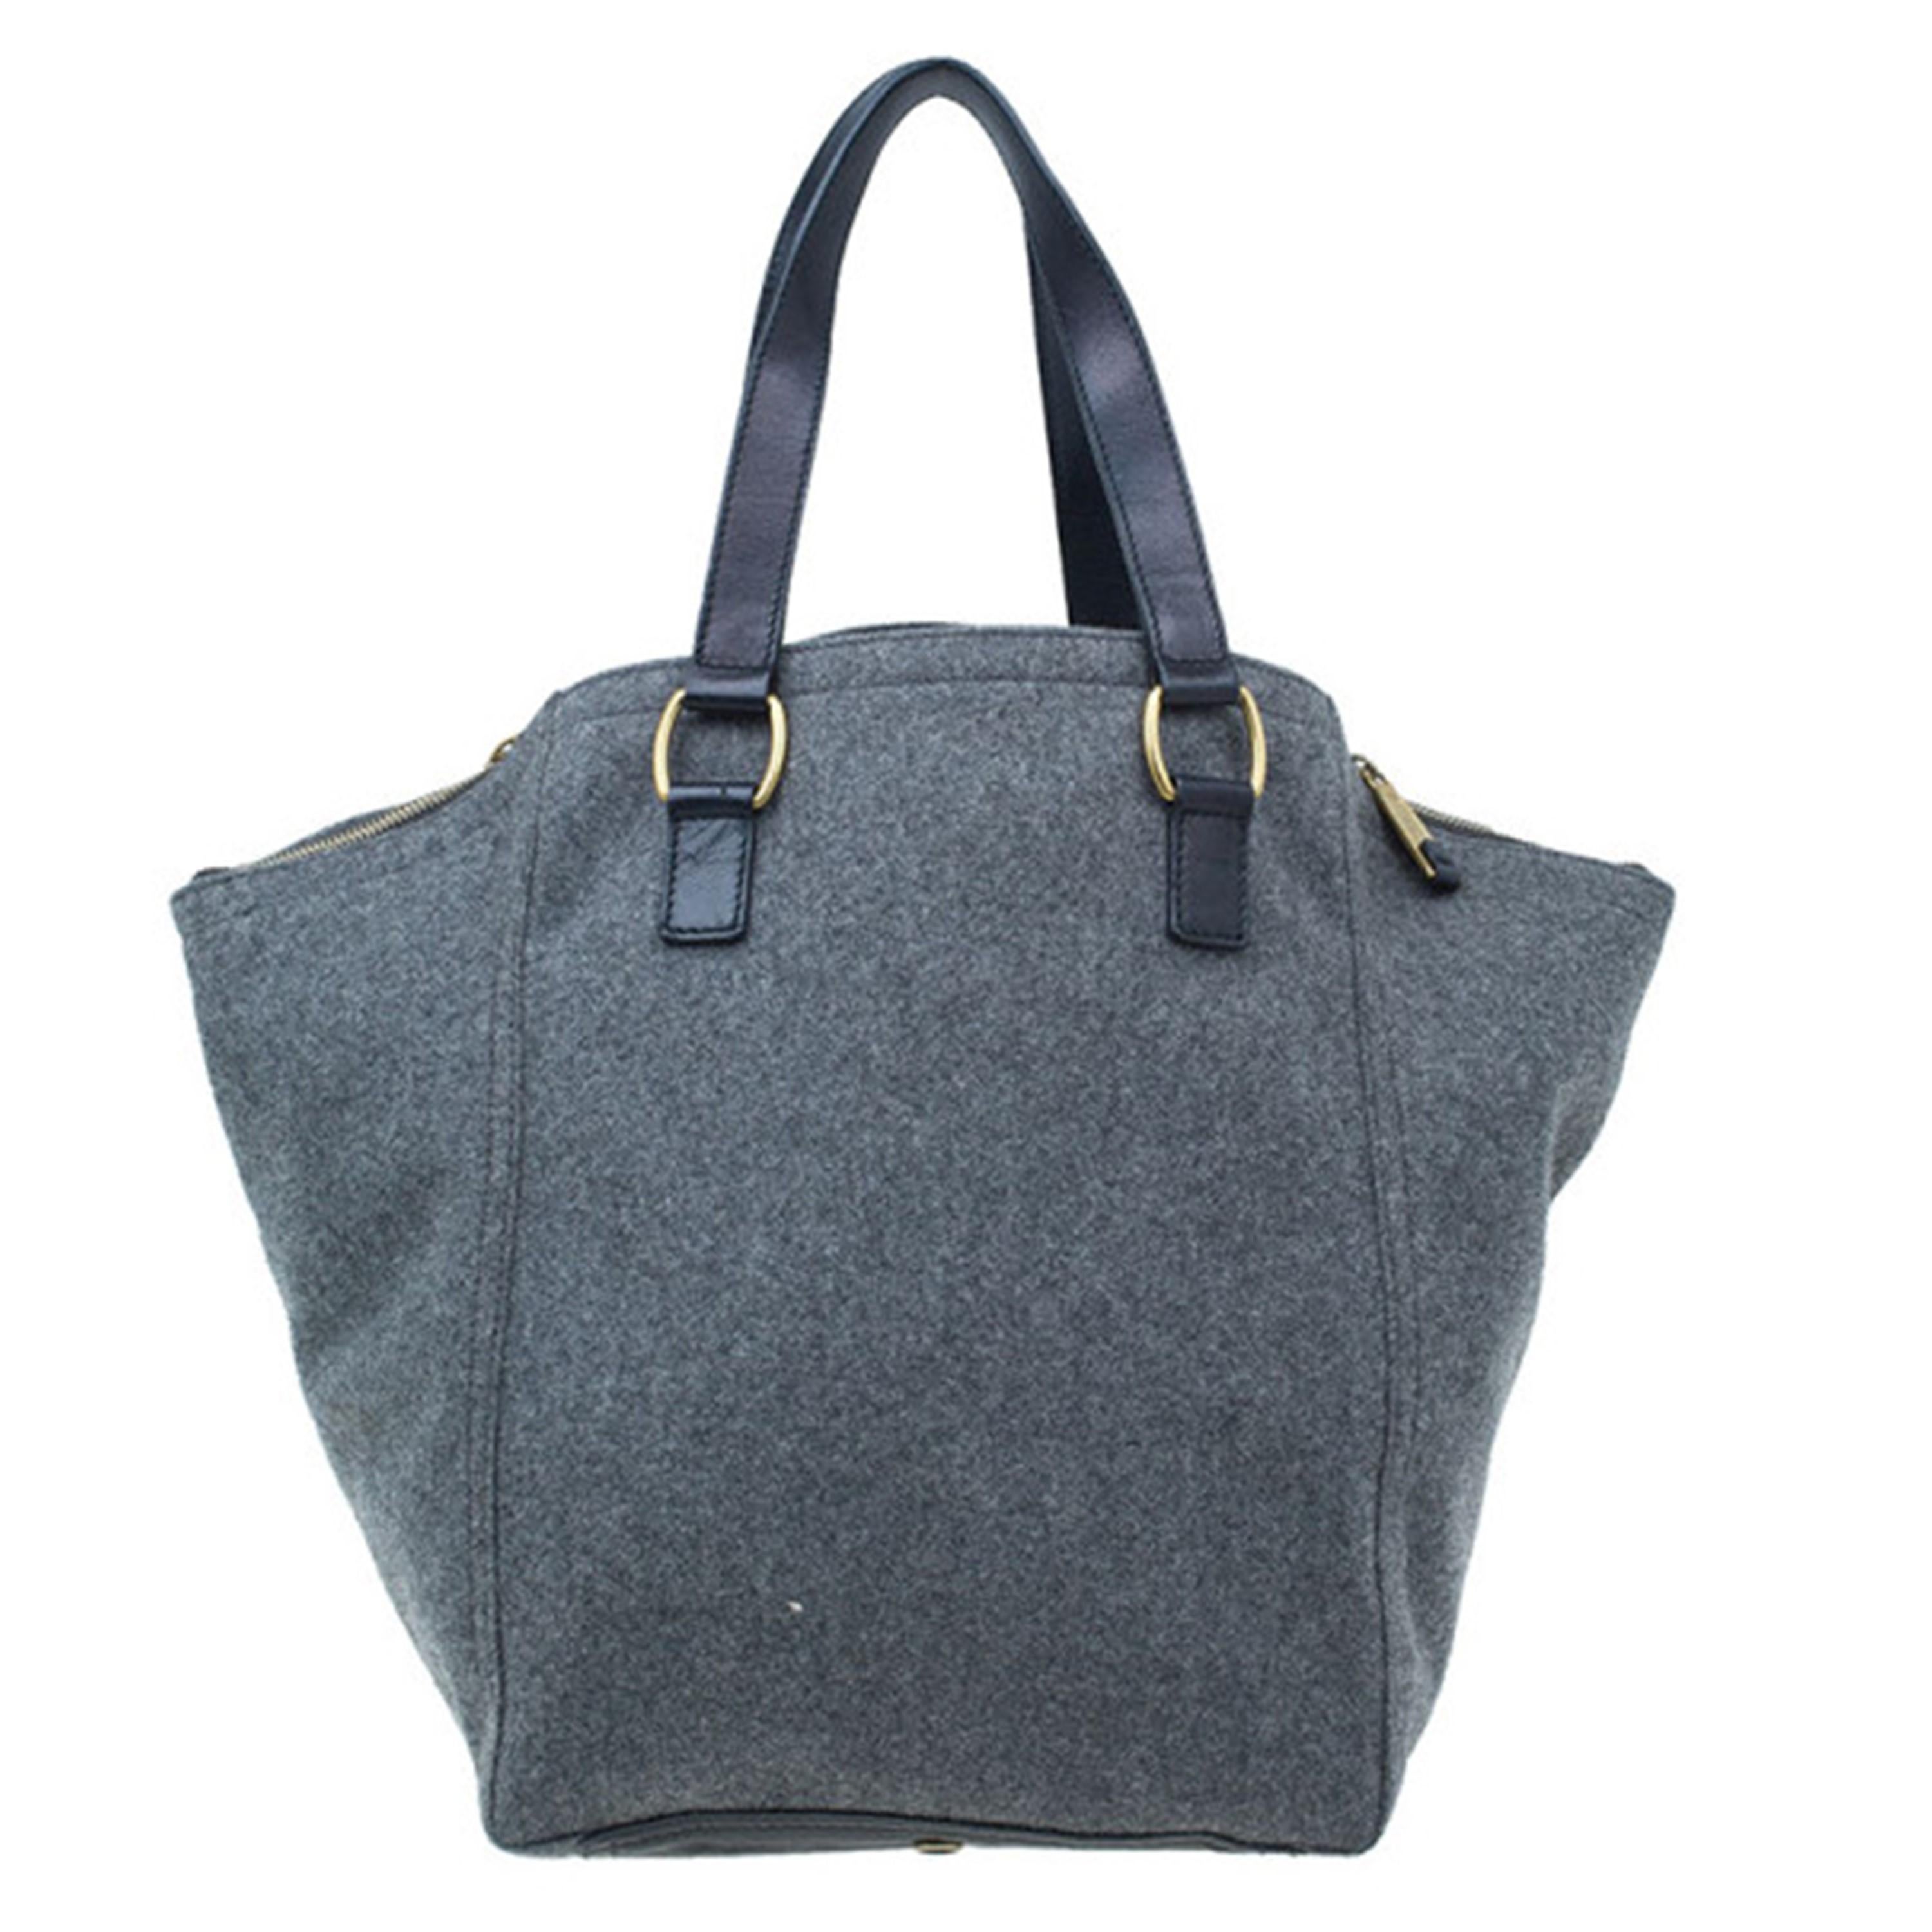 Make a statement with this big yet bold Saint Laurent Paris Downtown tote. Made from light grey felt, this stylish handbag is accent with brown leather, a front pocket with zippers, as well as gold tone studs and buckles. The spacious interior